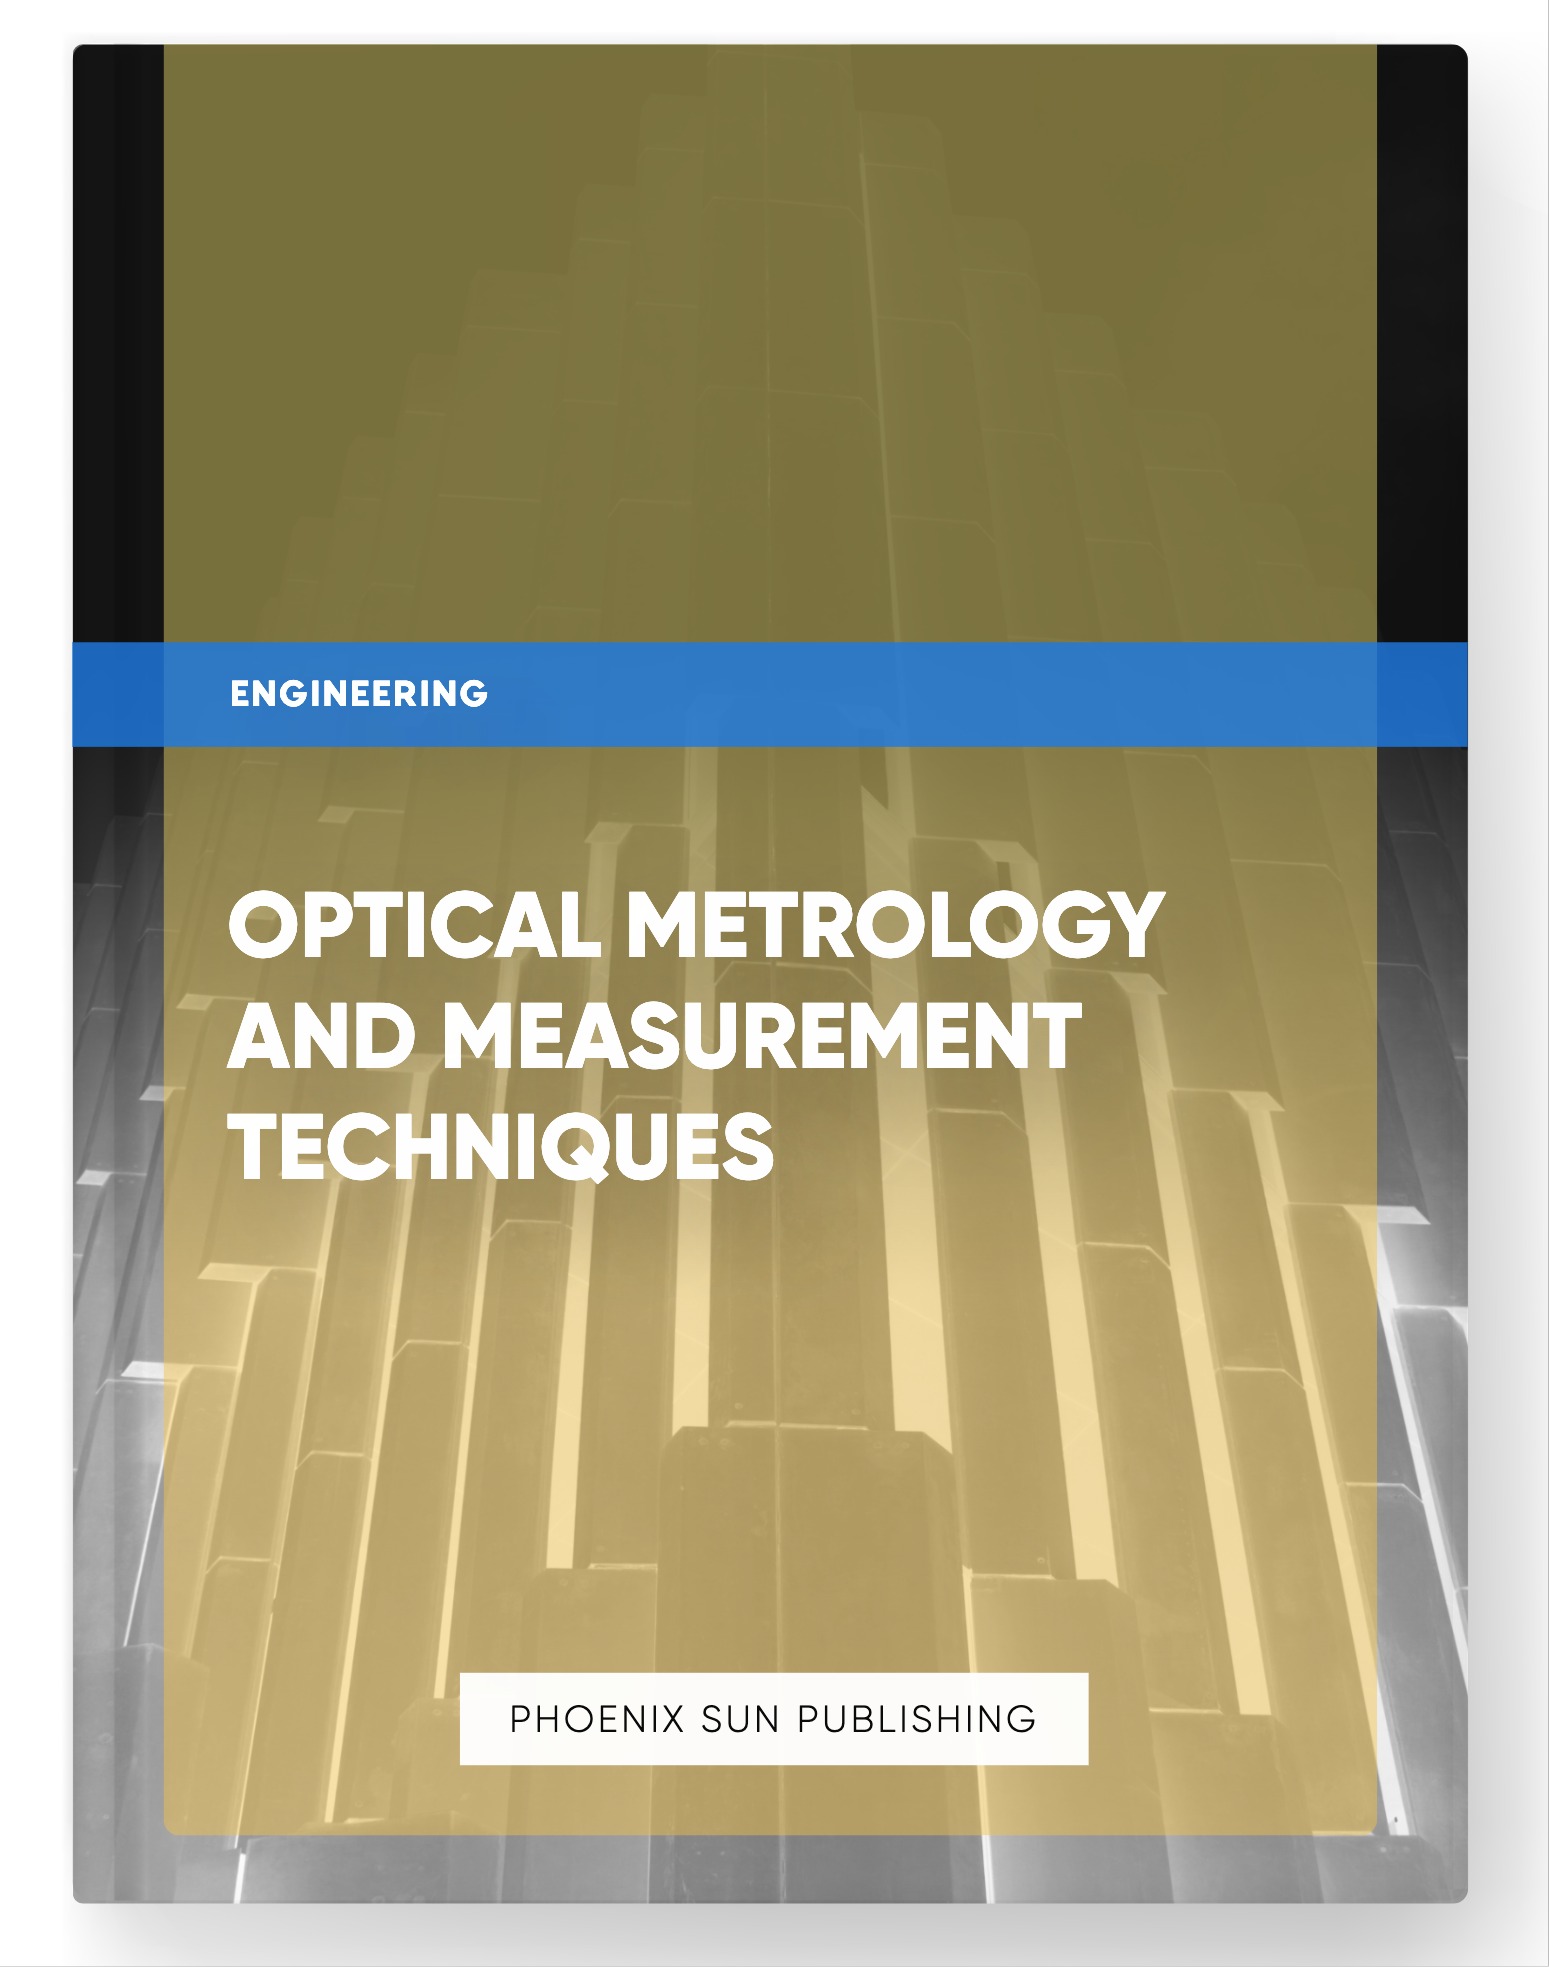 Optical Metrology and Measurement Techniques